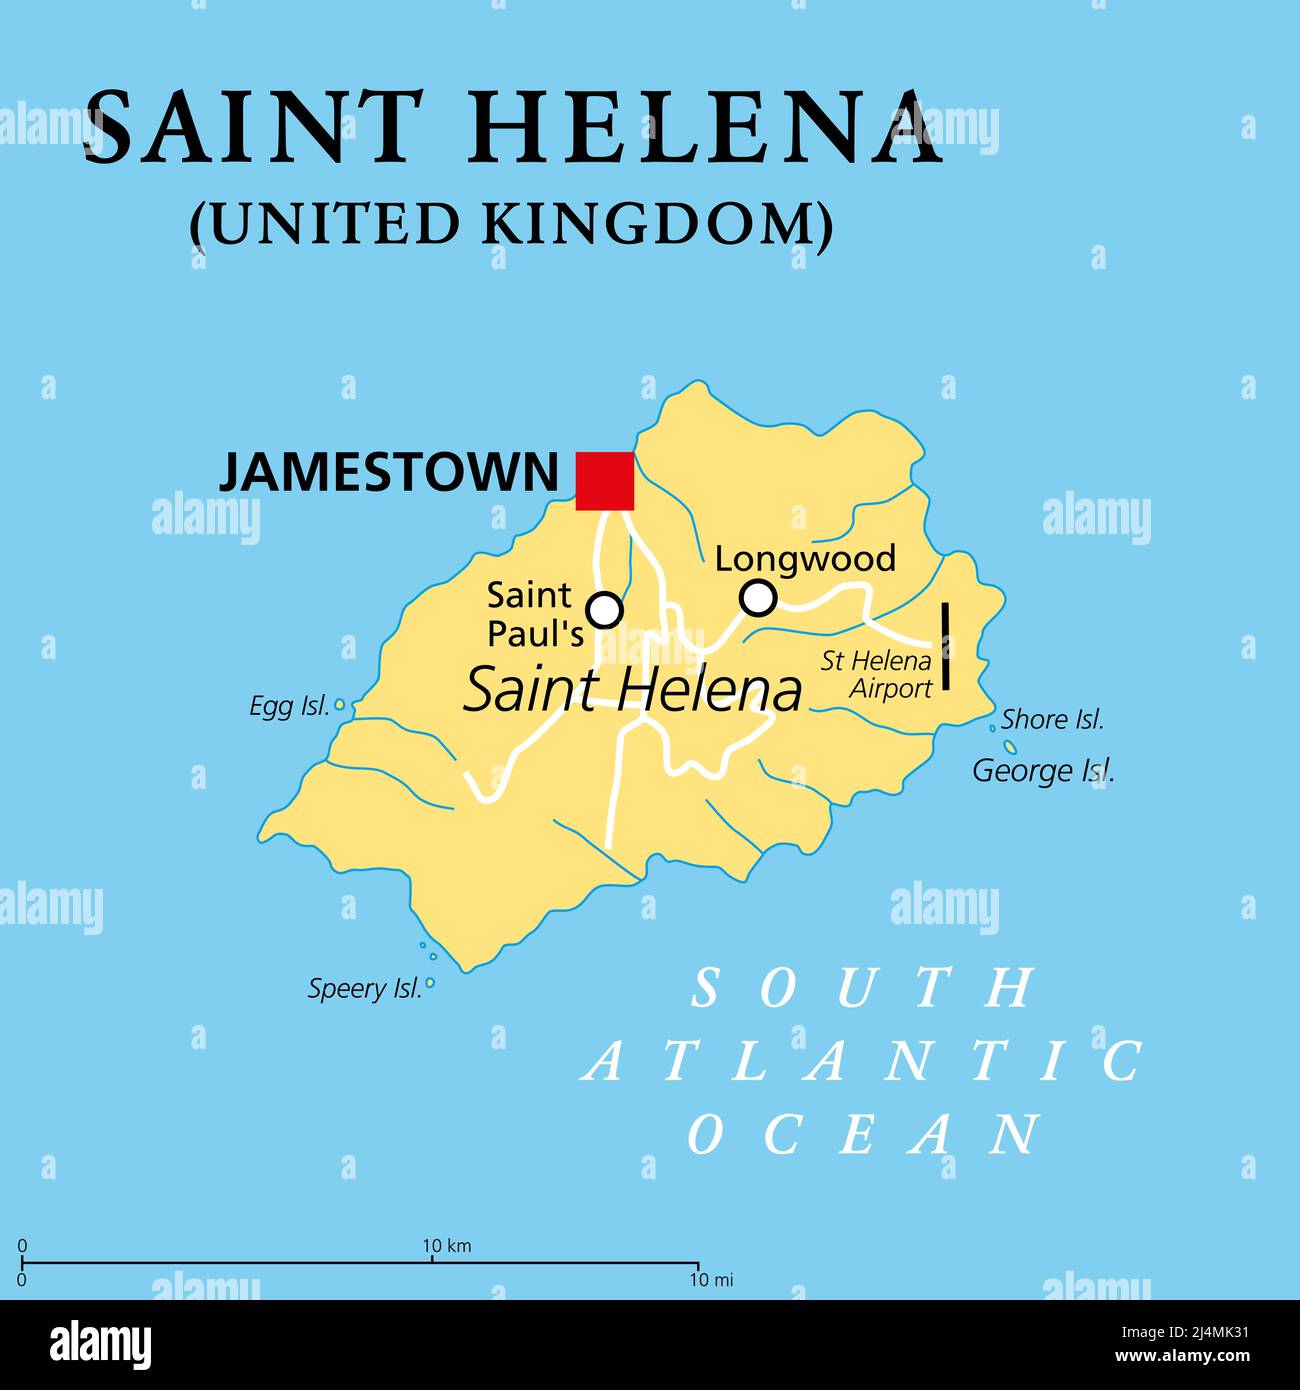 Saint Helena, political map. Tropical island and a British possession in the South Atlantic with capital Jamestown. Site of the 2nd exile of Napoleon. Stock Photo